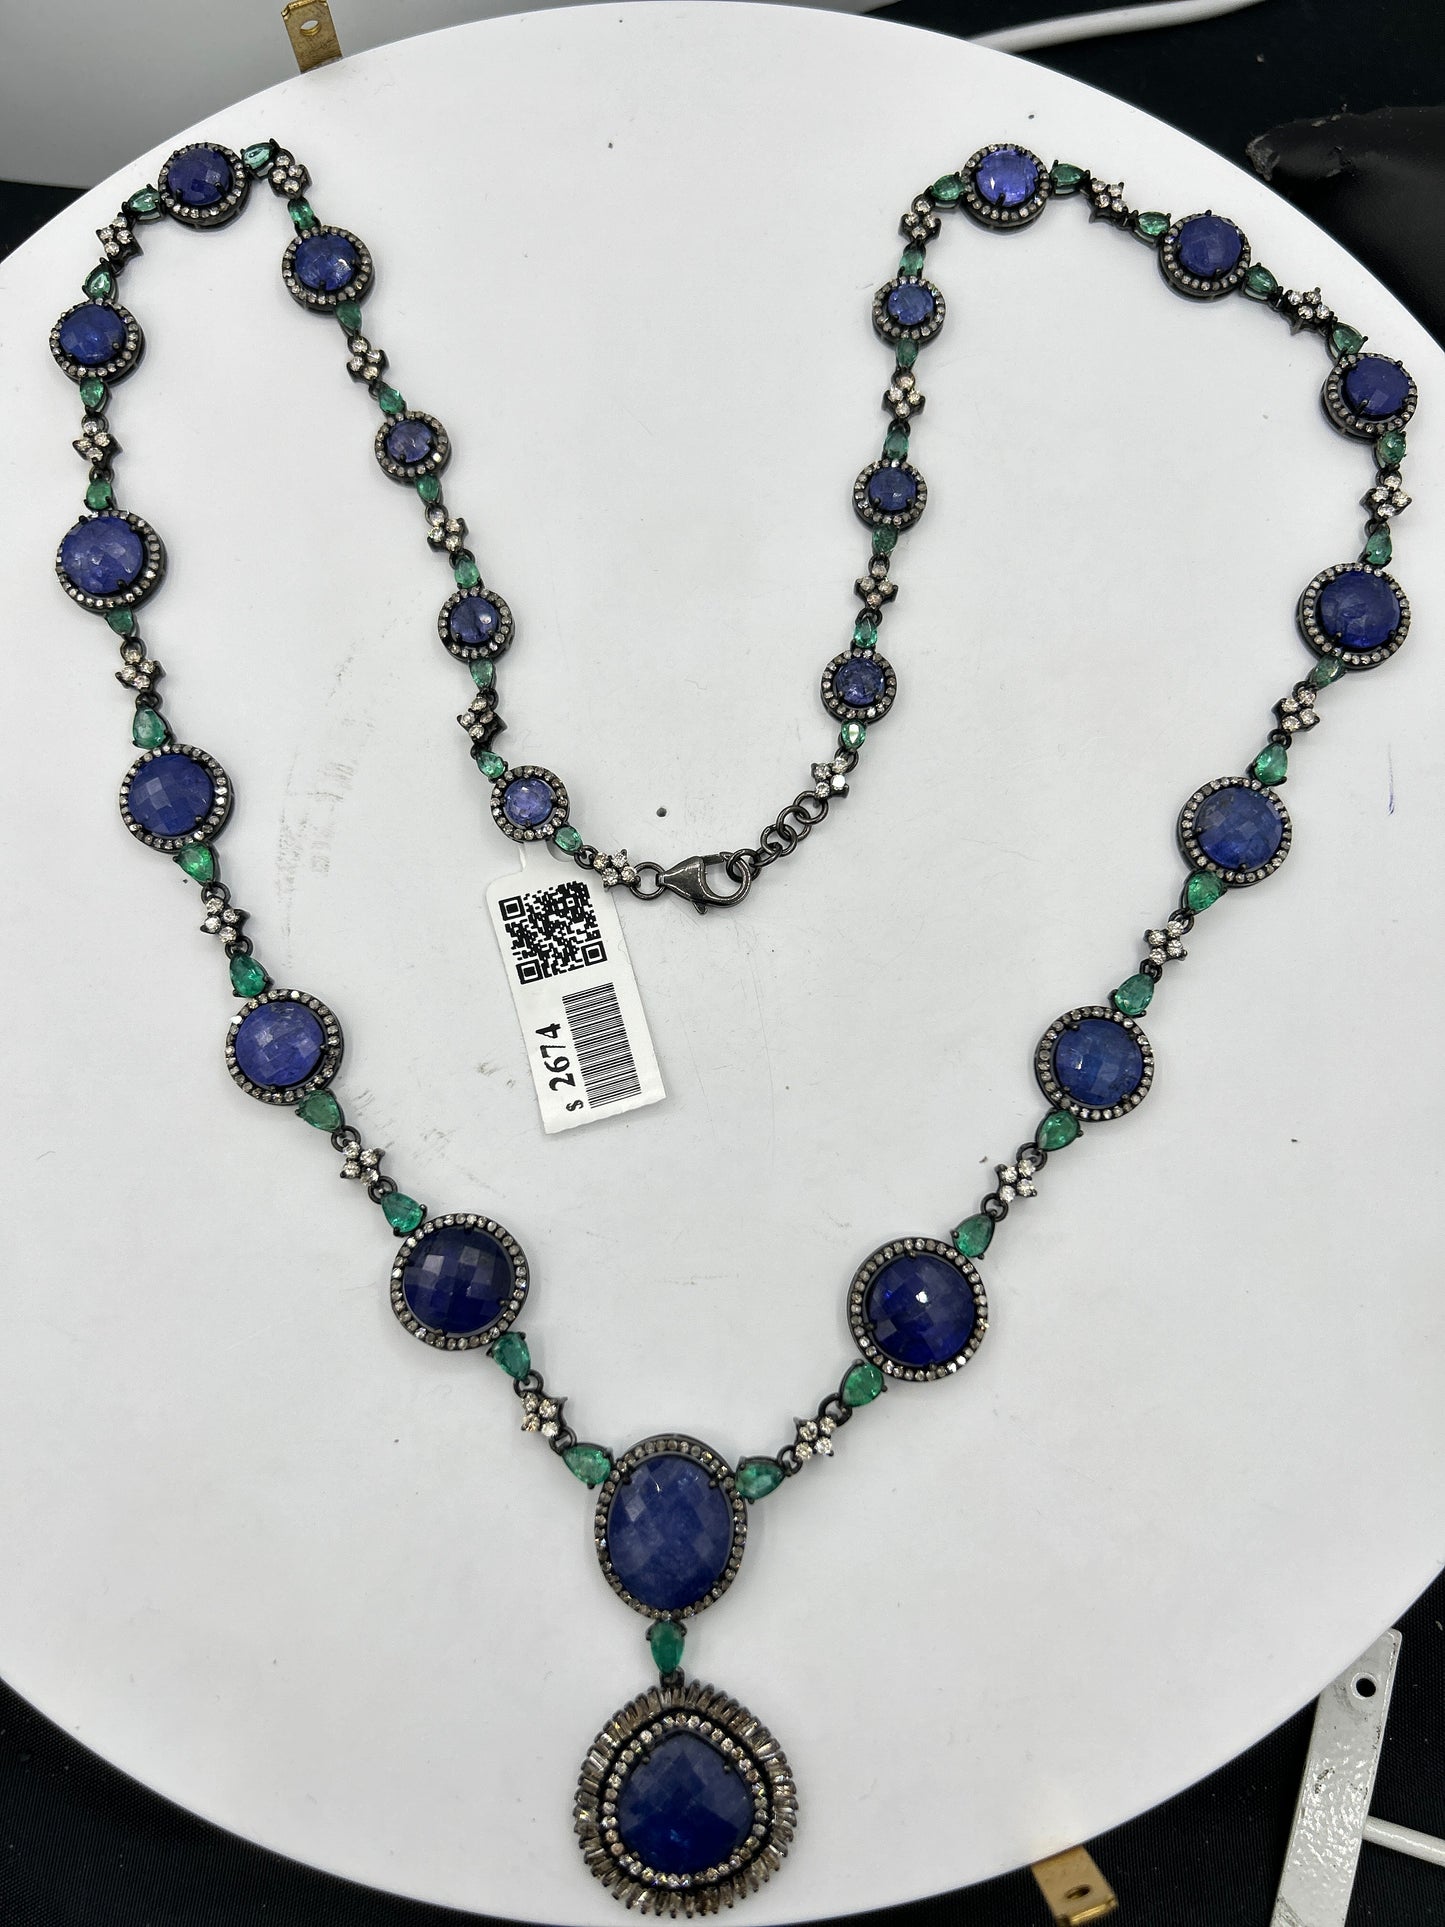 Tanzanite and Emerald Long Necklace with Diamonds